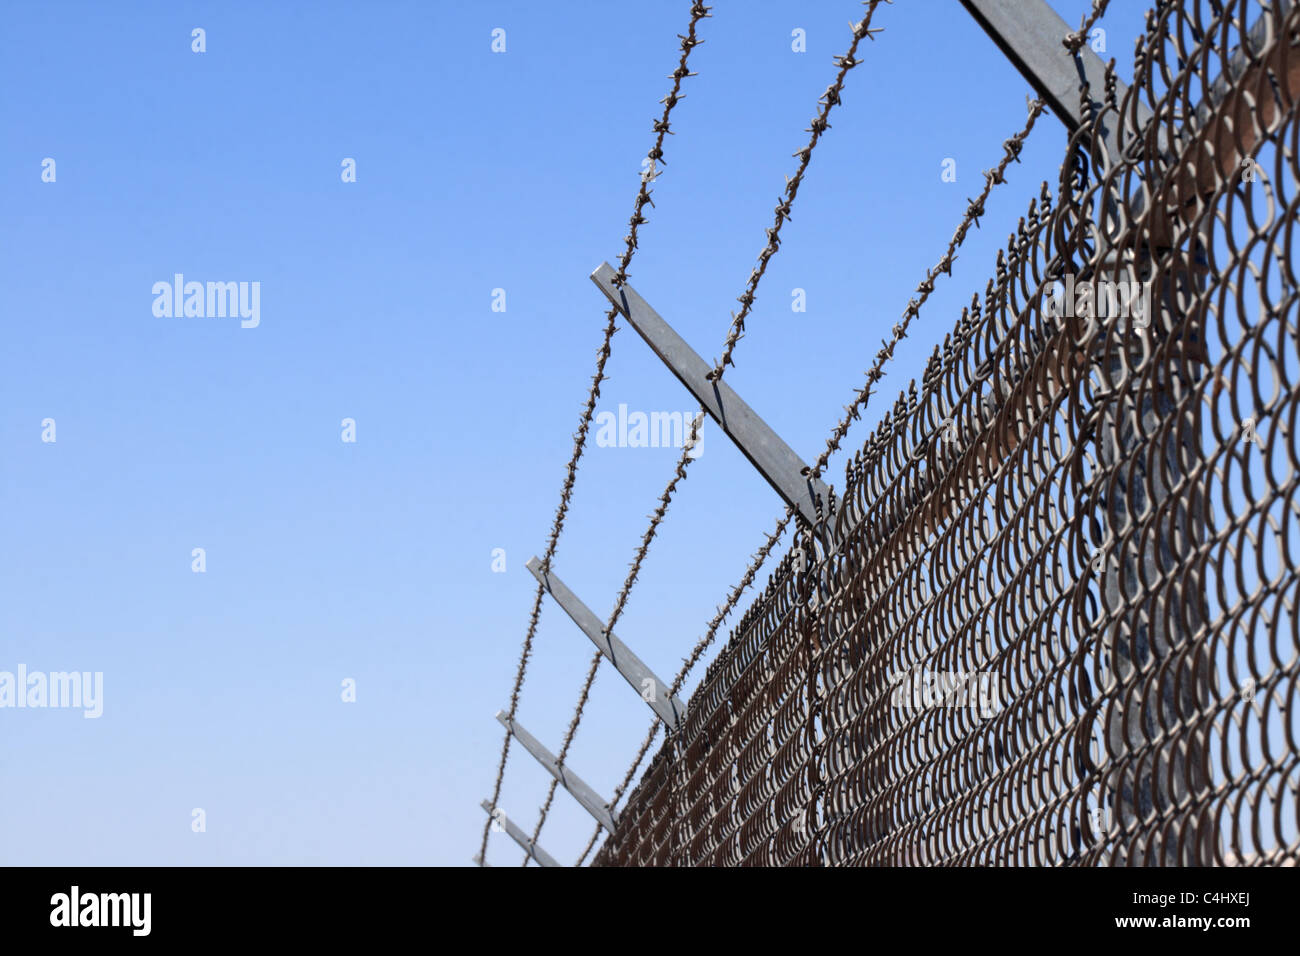 horizontal image of a chain link security fence topped with three strands of barbed wire and blue sky background Stock Photo